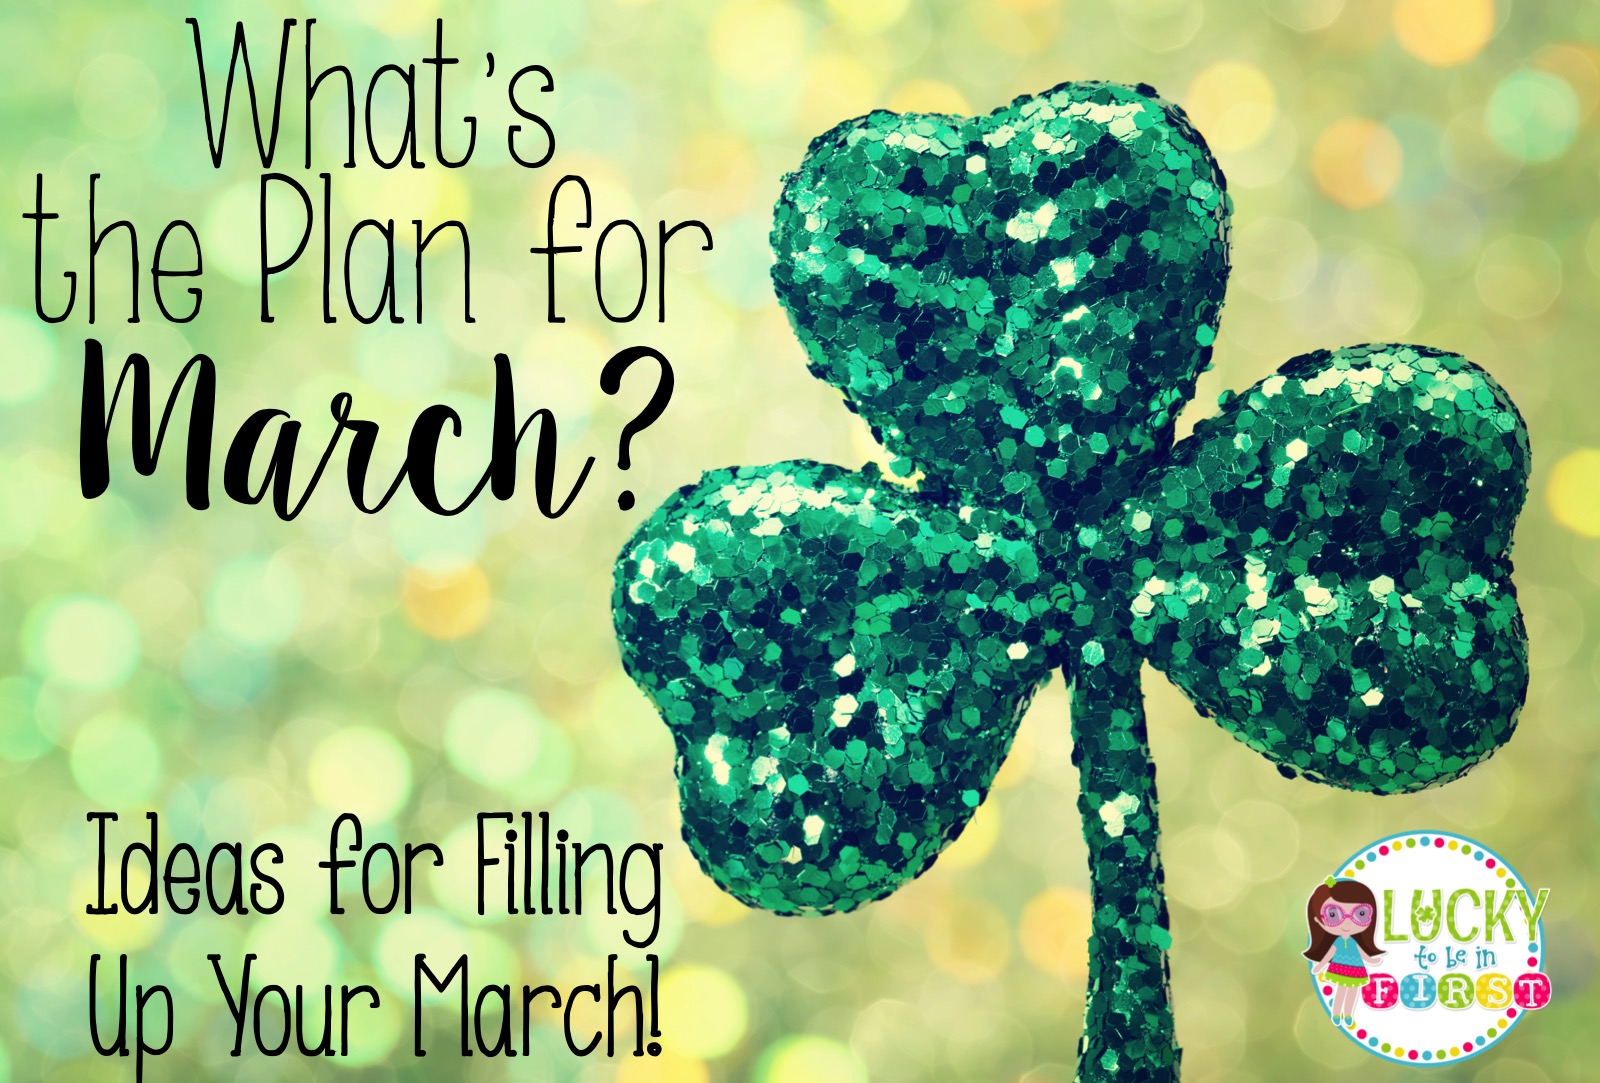 What's the Plan for March Blog Lucky to Be in First